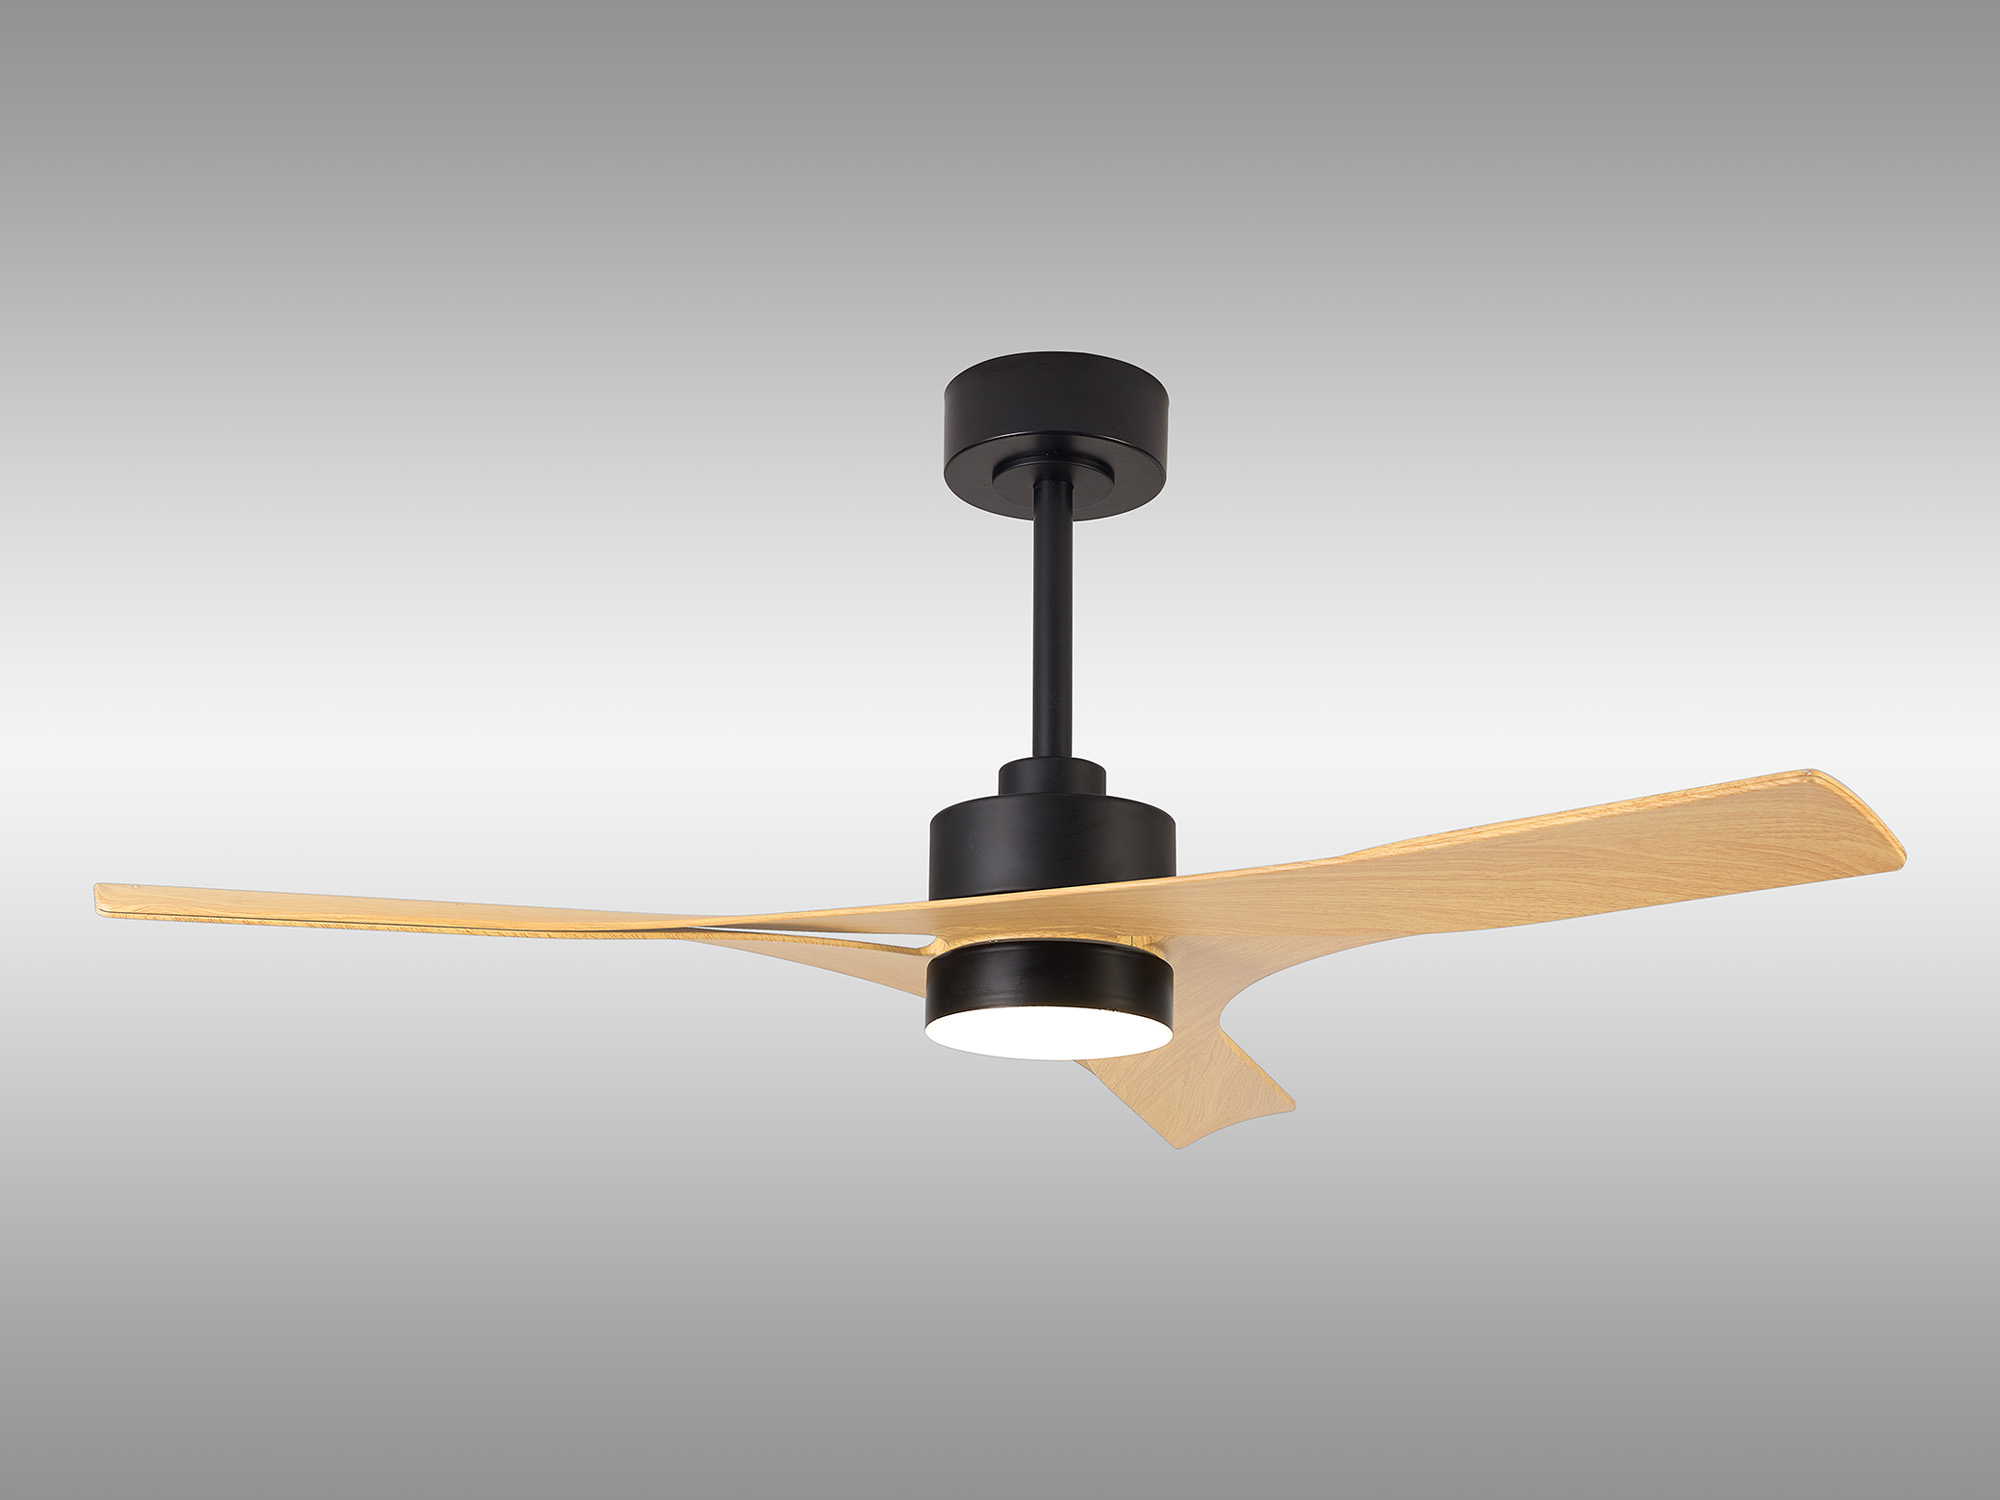 Thai Heating, Cooling & Ventilation Mantra Ceiling Fans